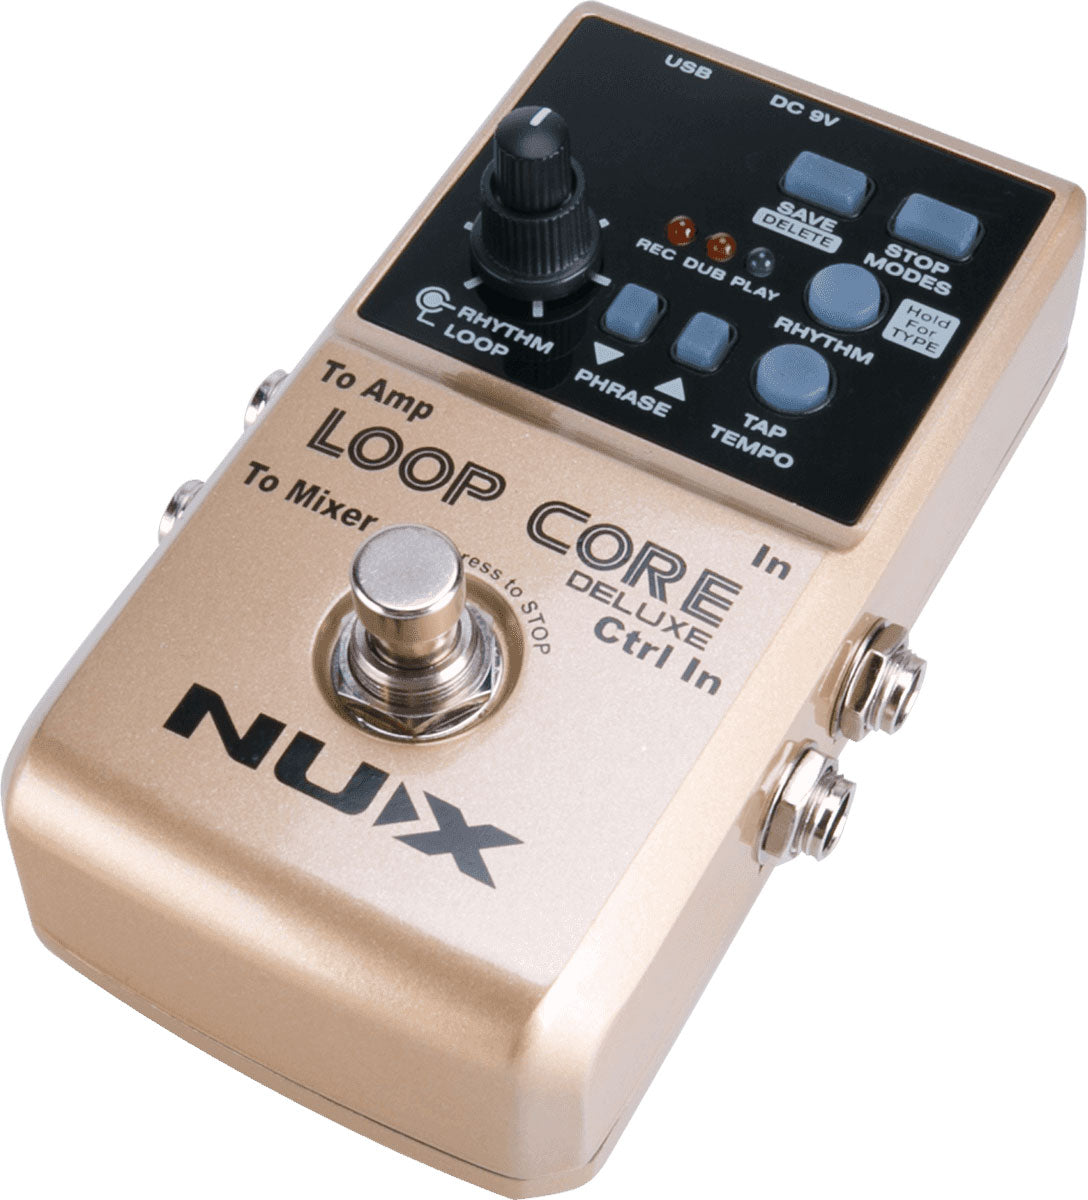 NUX LOOPCORE-DELUXE - STOCK MAGASIN